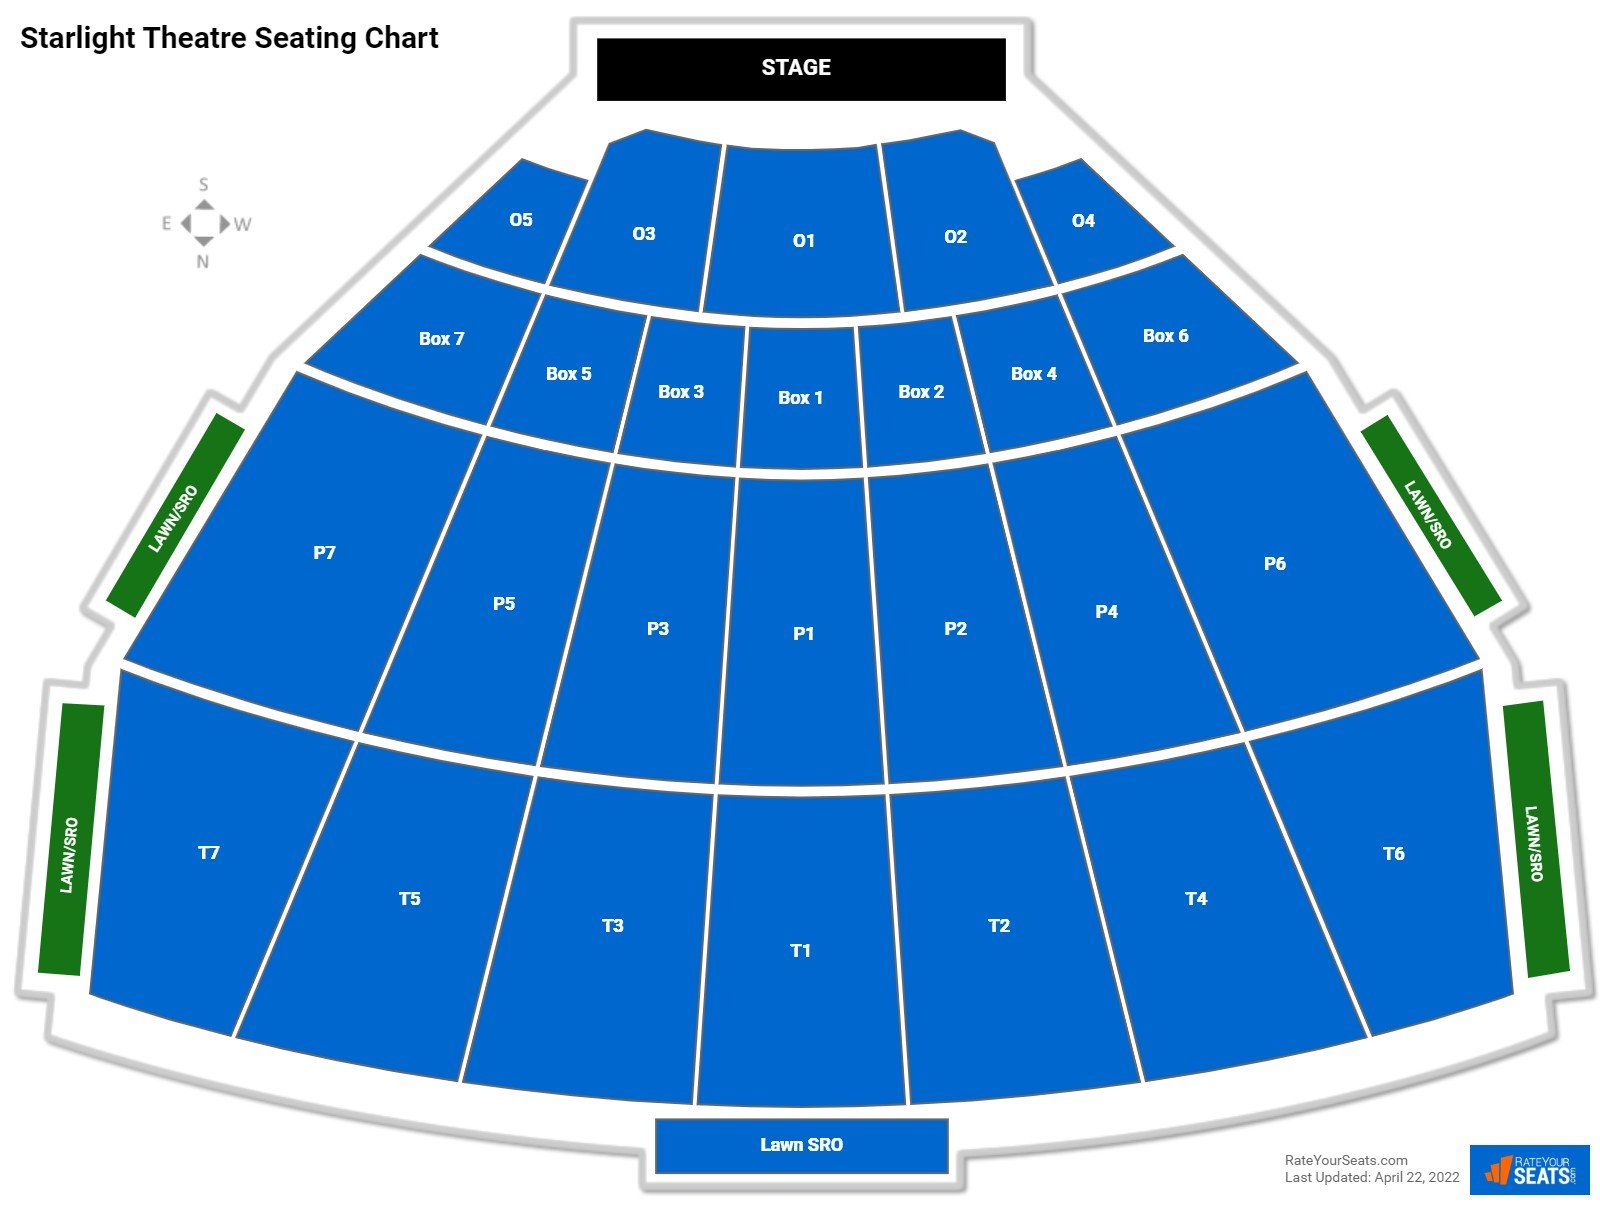 Starlight Theatre Concert Seating Chart